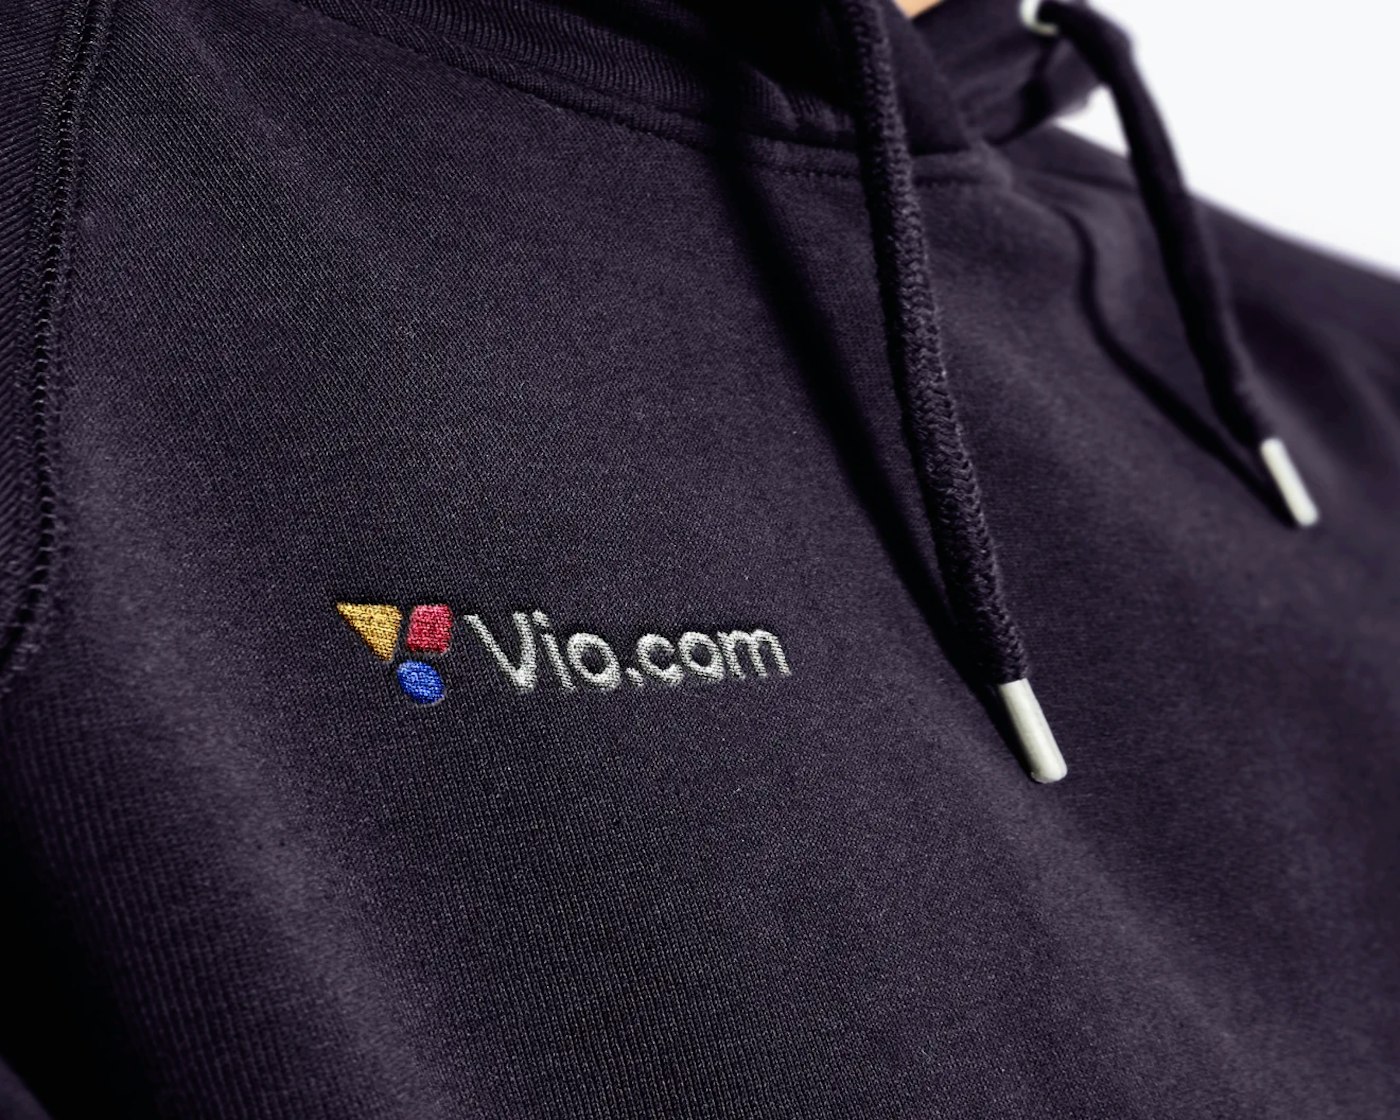 Perspective close up of a dark blue hoodie with an embroidered Vio.com logo with a white logotype combined with a white logo mark consisting of three colored shapes.